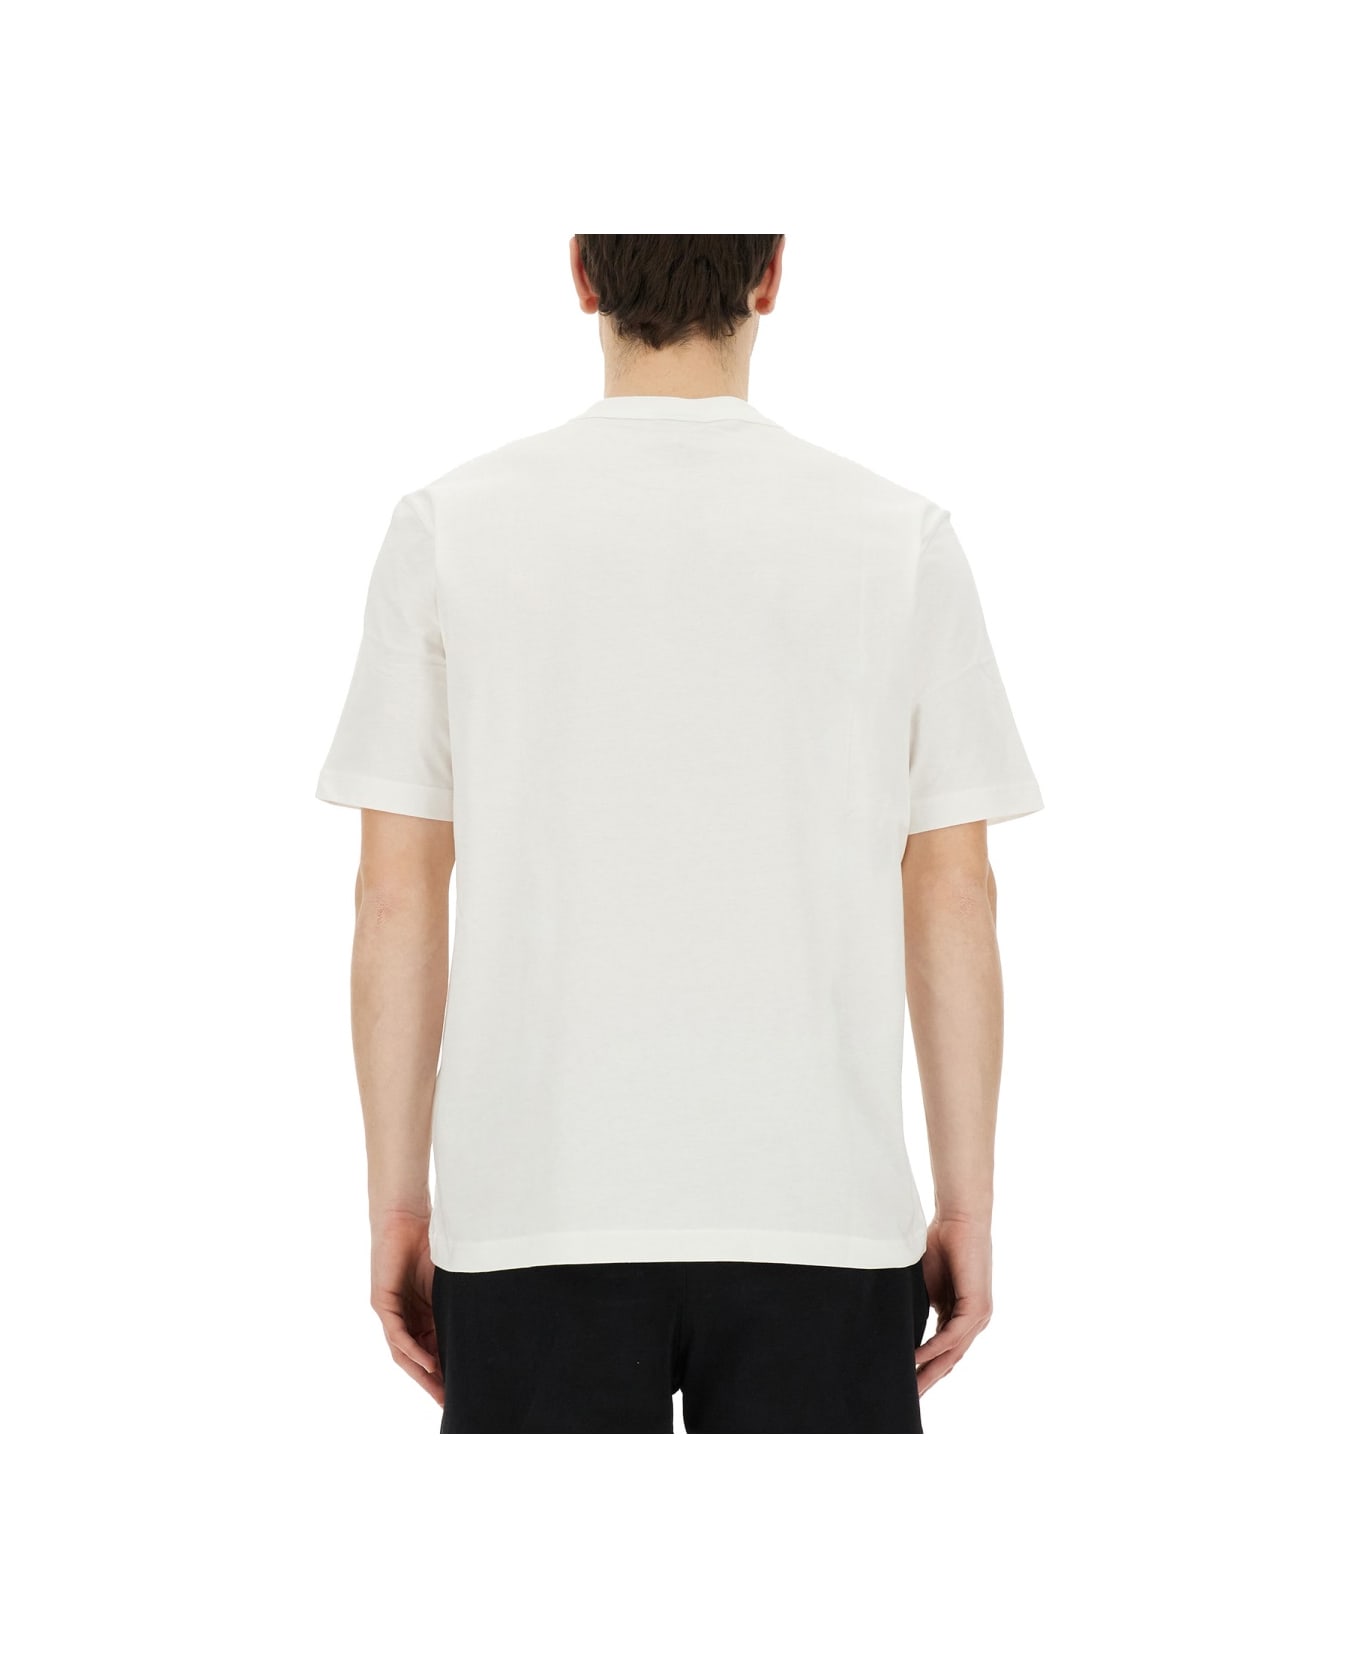 PS by Paul Smith Skull T-shirt - White シャツ